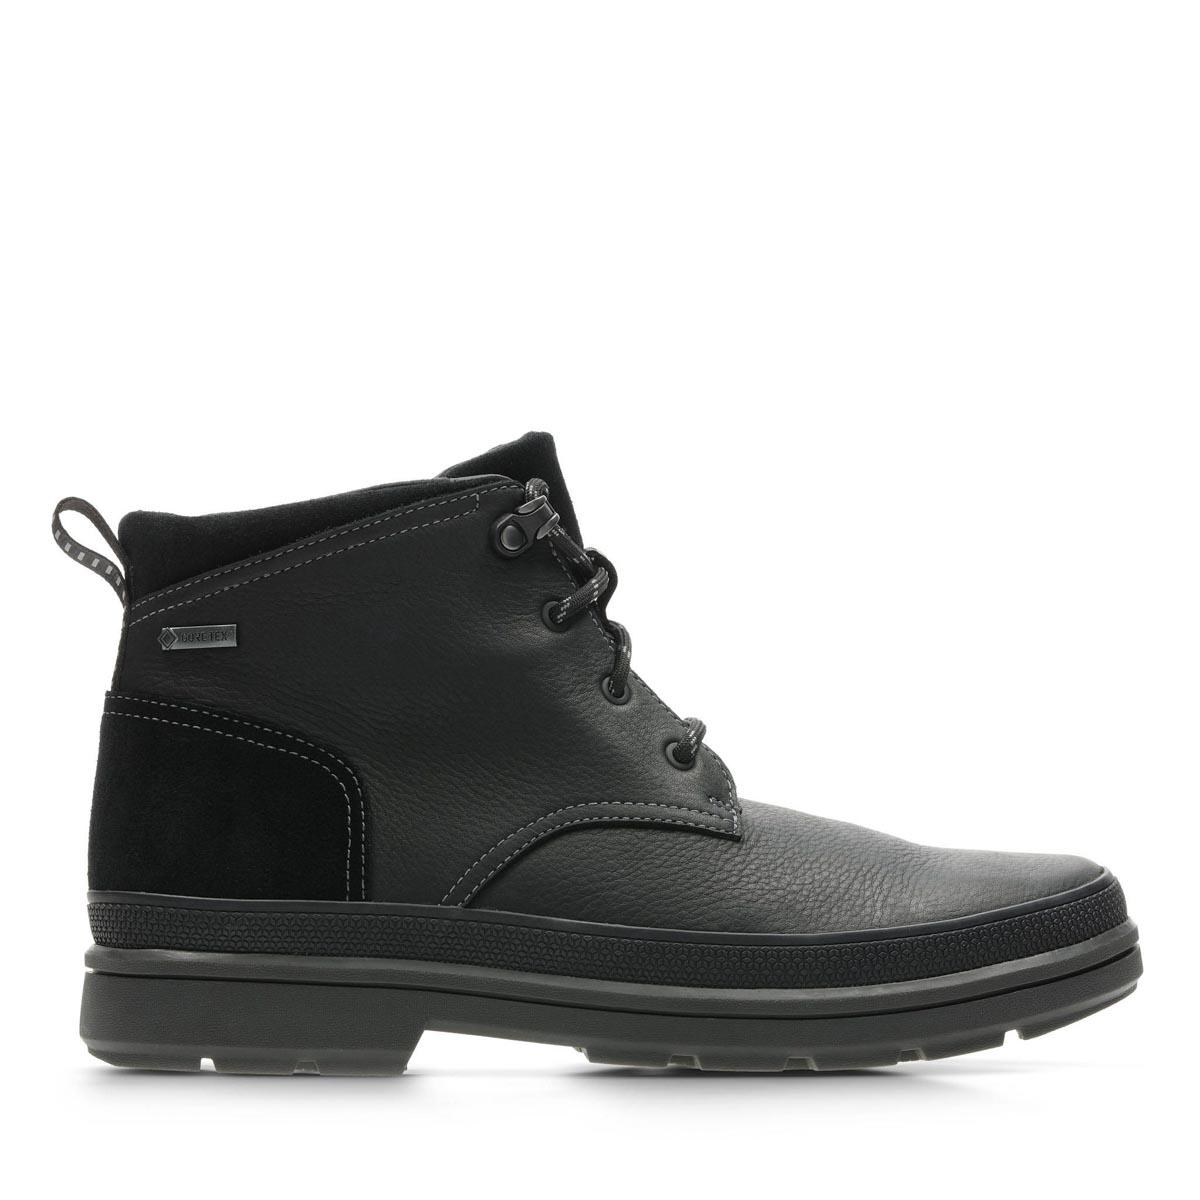 Clarks Rushway Mid Gtx G Fit Black 